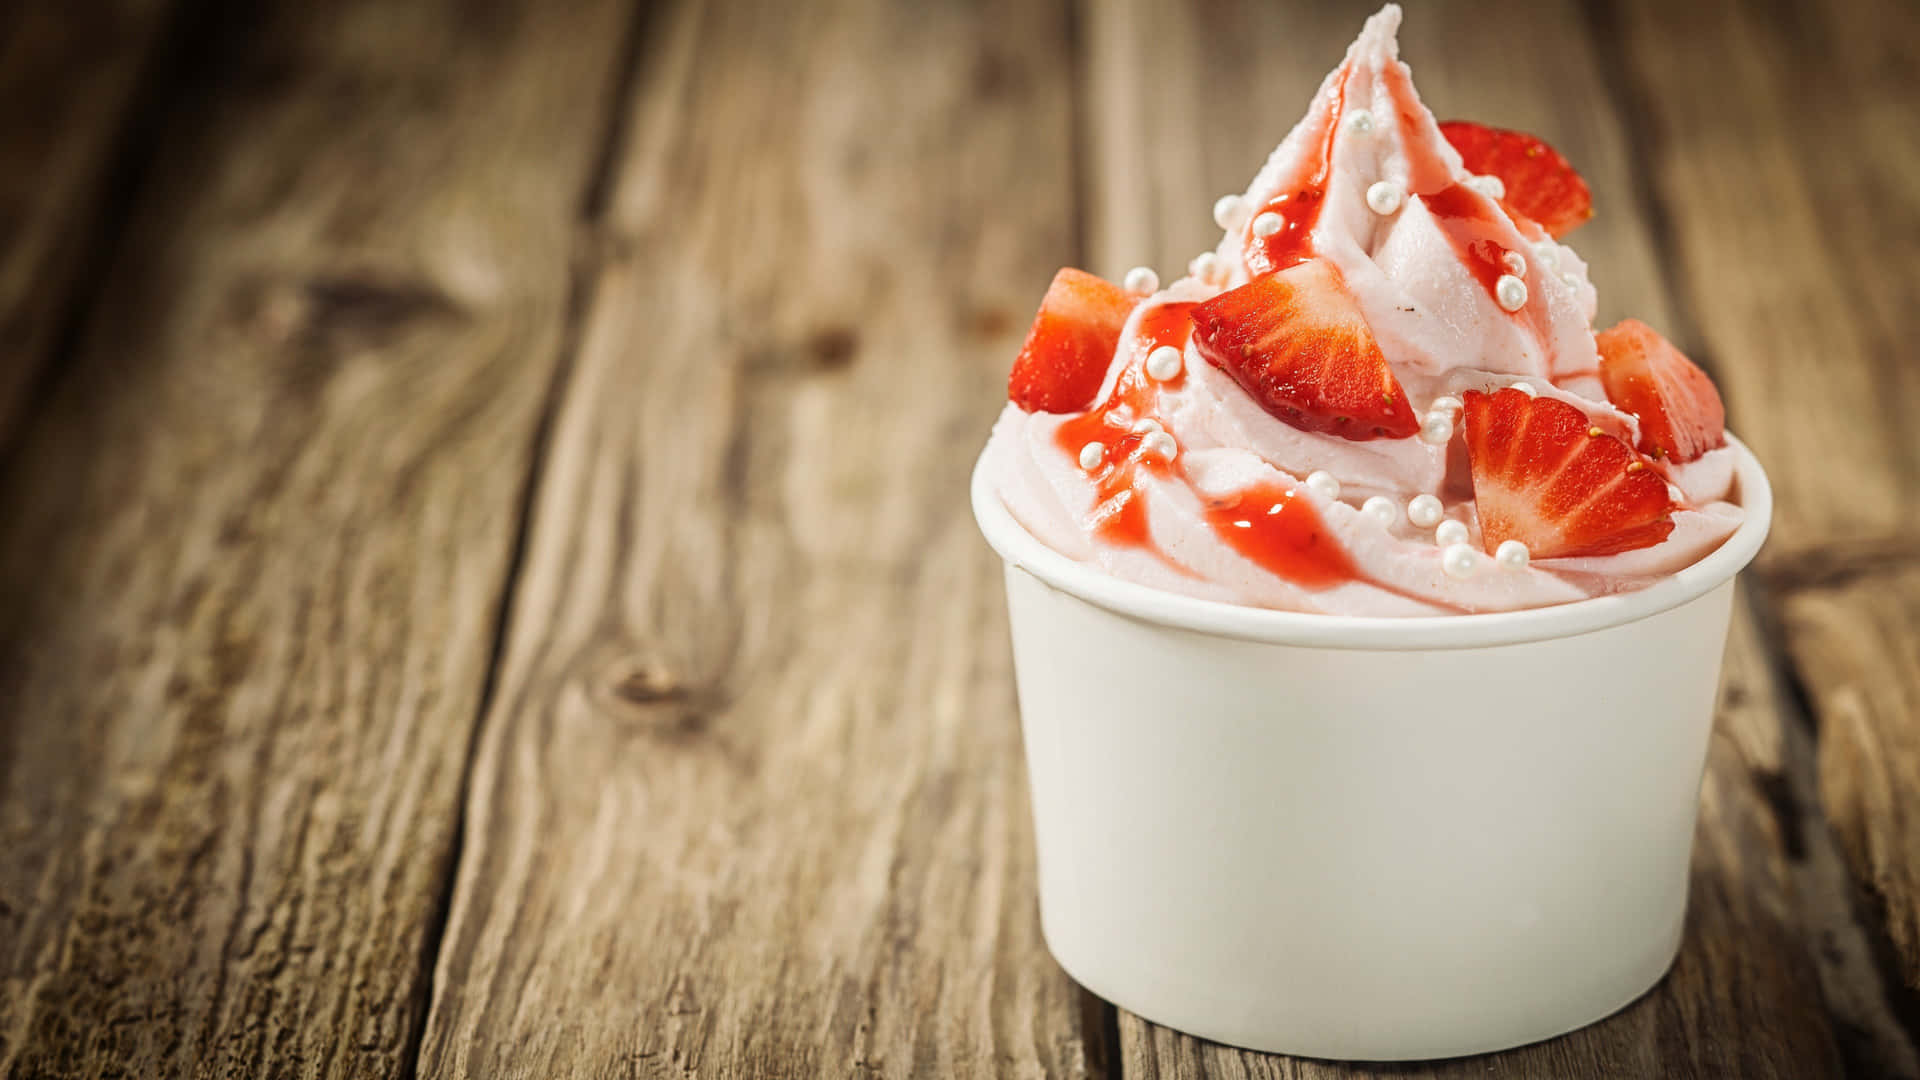 Enjoy life's simple pleasures with an incredible cup of ice cream